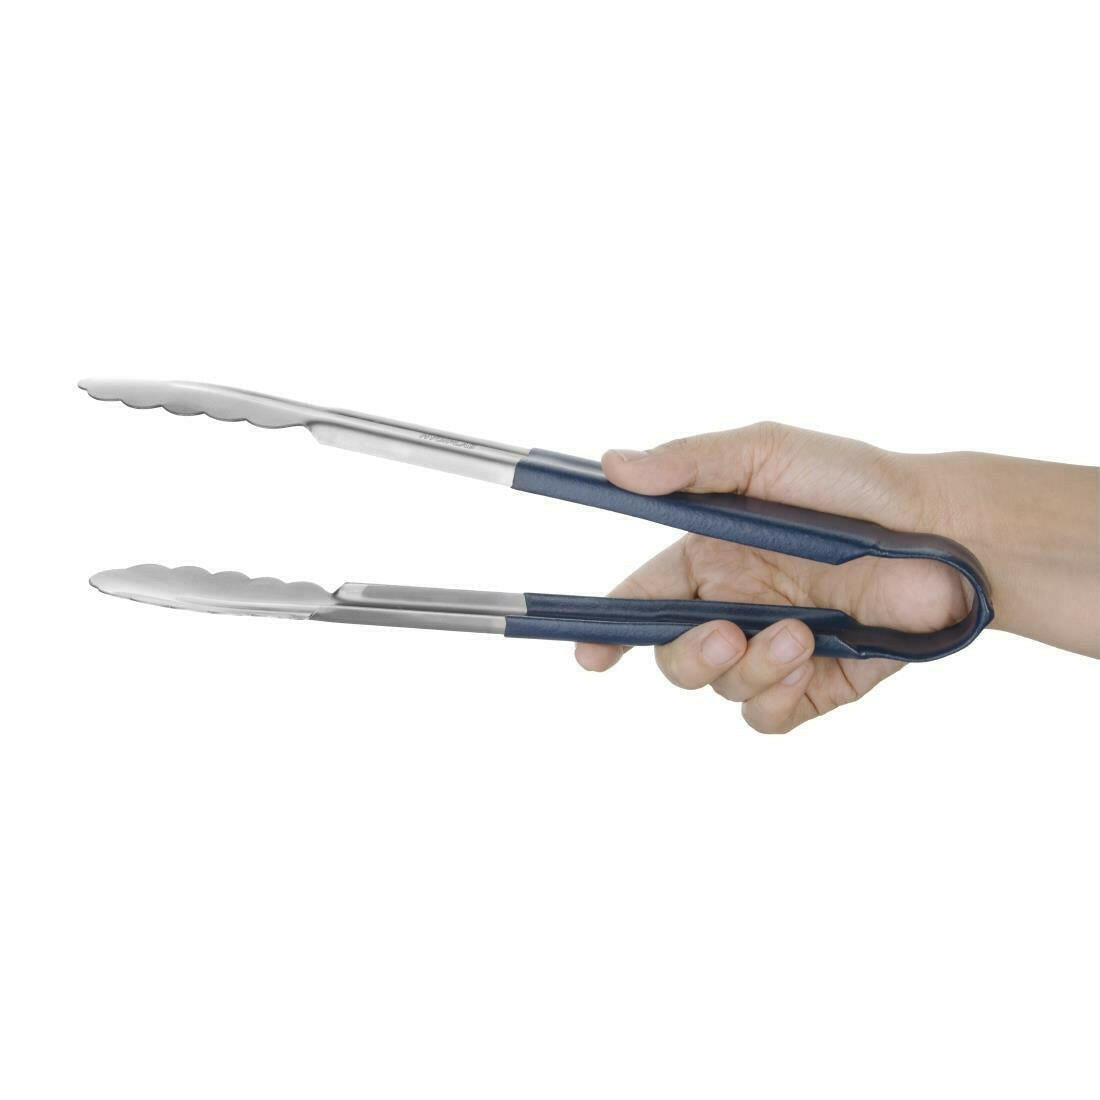 Hygiplas Colour Coded Blue Serving Tongs 300mm